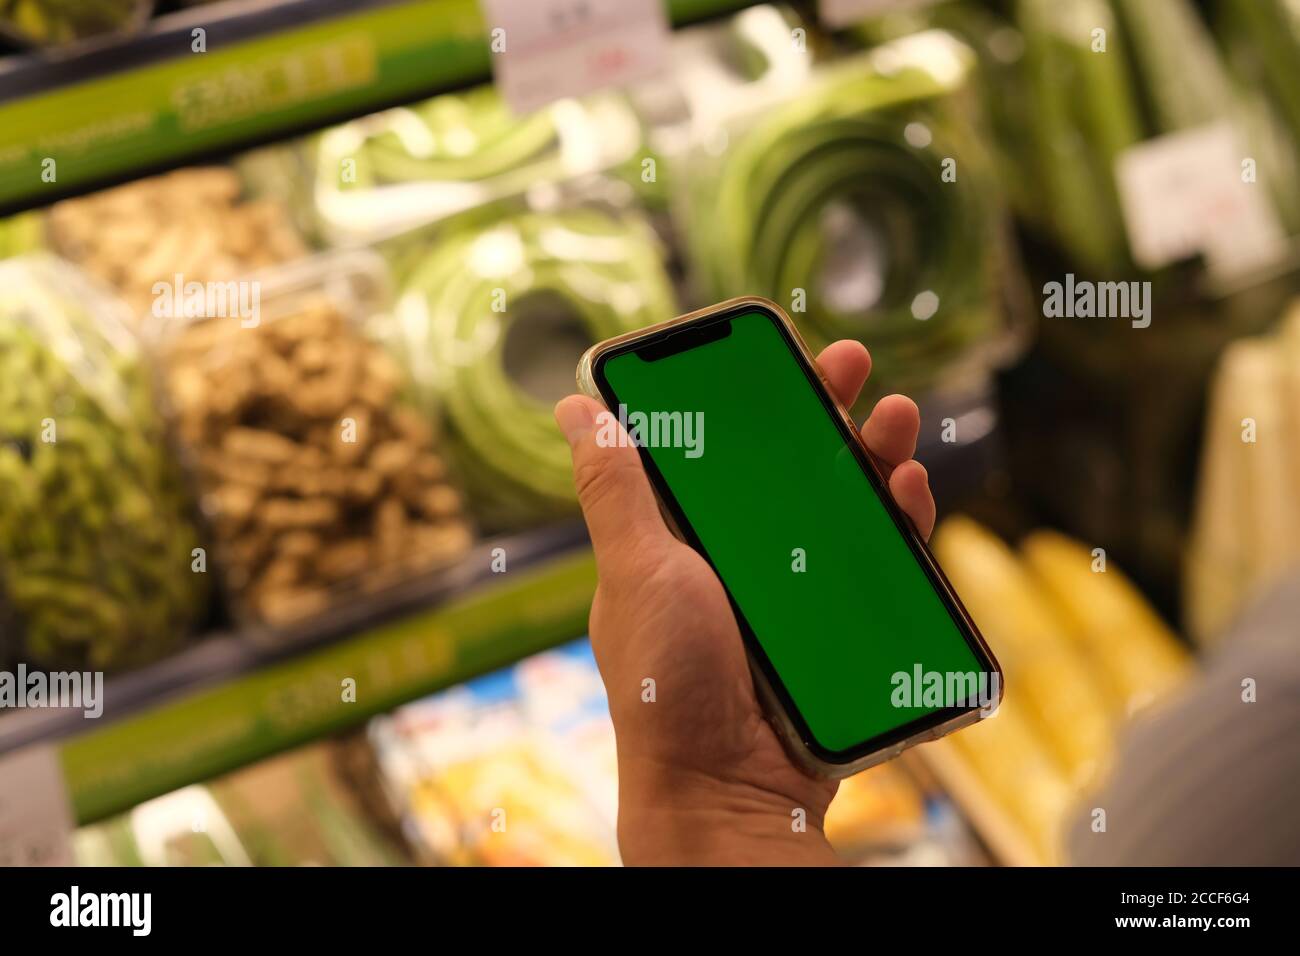 over shoulder of people holding green screen smart phone at grocery store Stock Photo